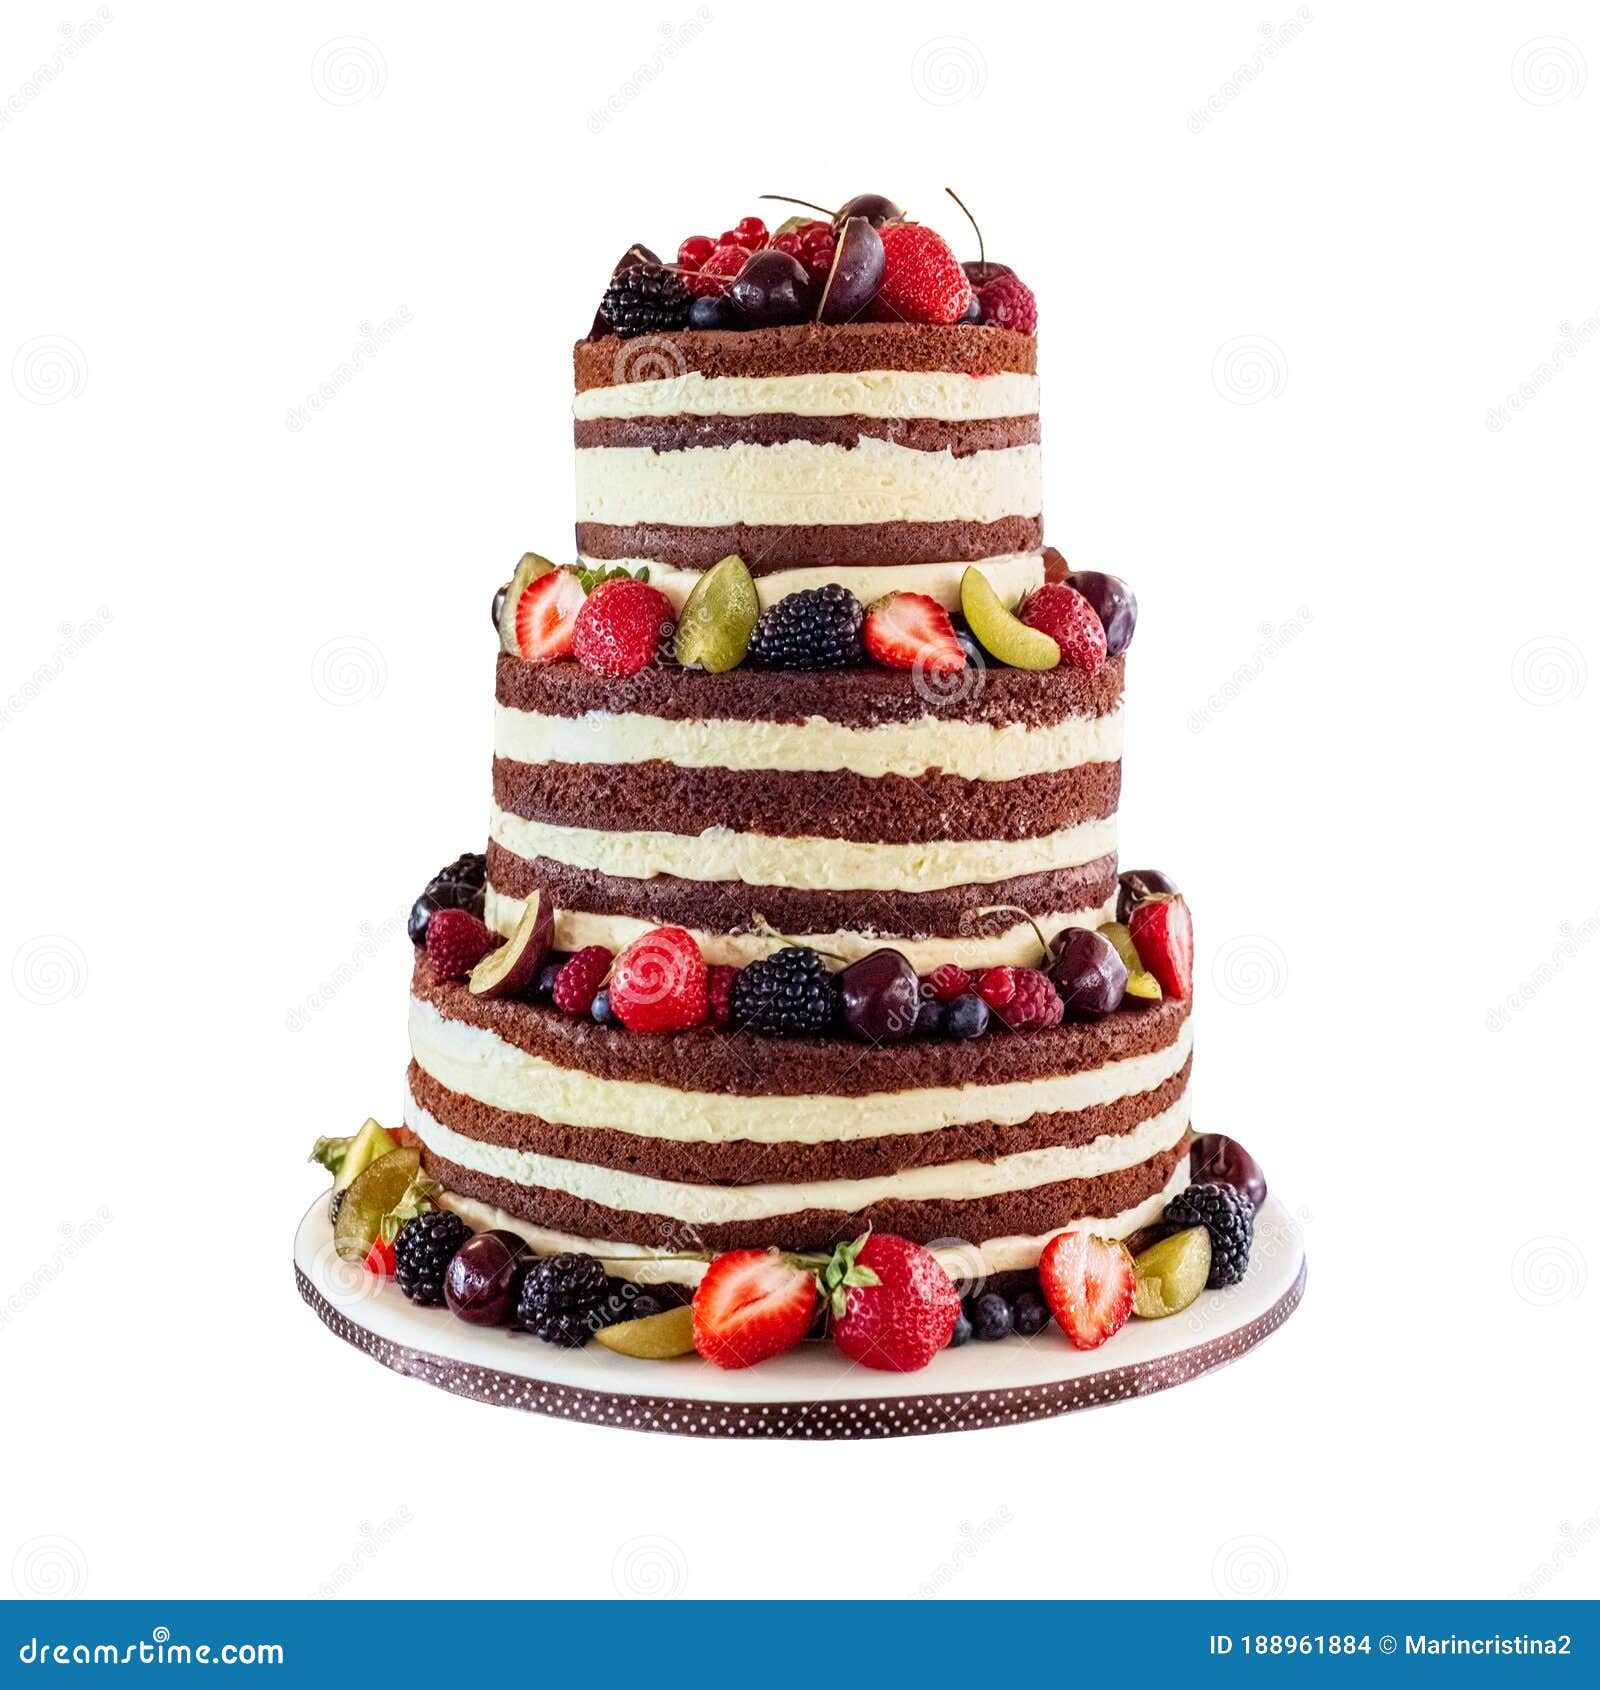 Illustration Of A Three Tier Birthday Cake With Colorful Candles Royalty Free Cliparts Vectors And Stock Illustration Image 80832482